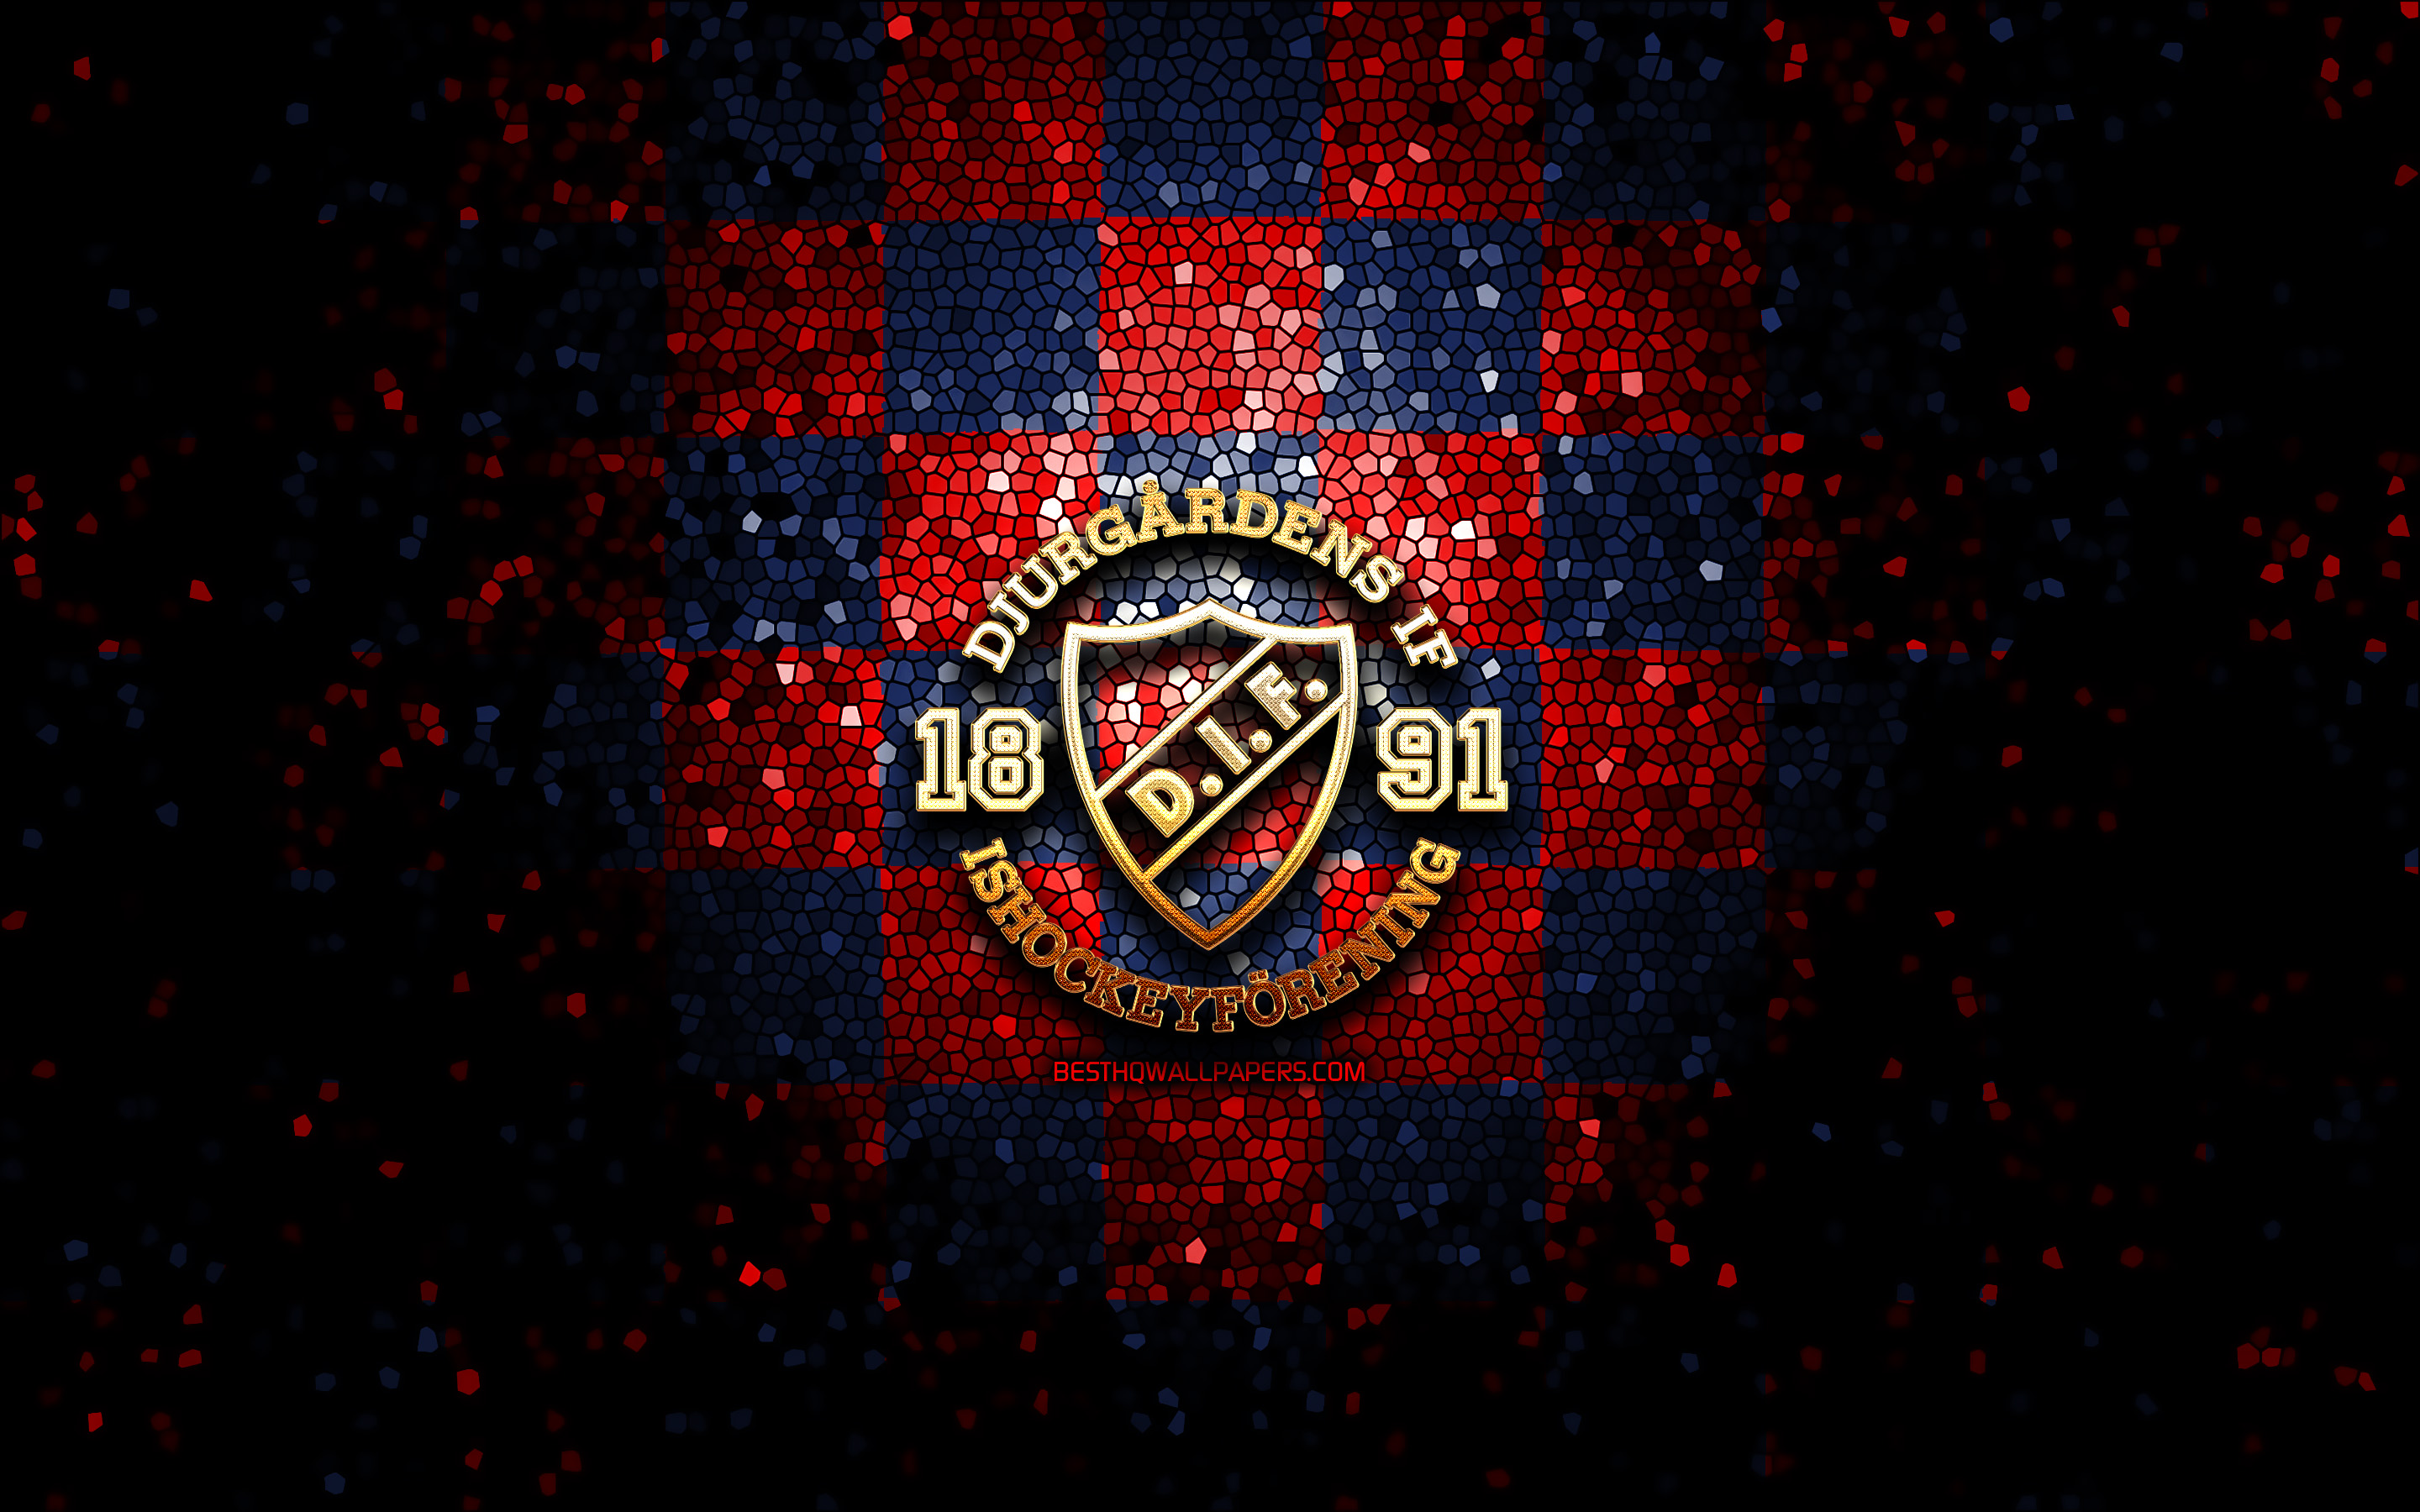 Download wallpaper Djurgardens IF, glitter logo, SHL, blue red checkered background, hockey, swedish hockey team, Djurgardens IF logo, mosaic art, swedish hockey league for desktop with resolution 2880x1800. High Quality HD picture